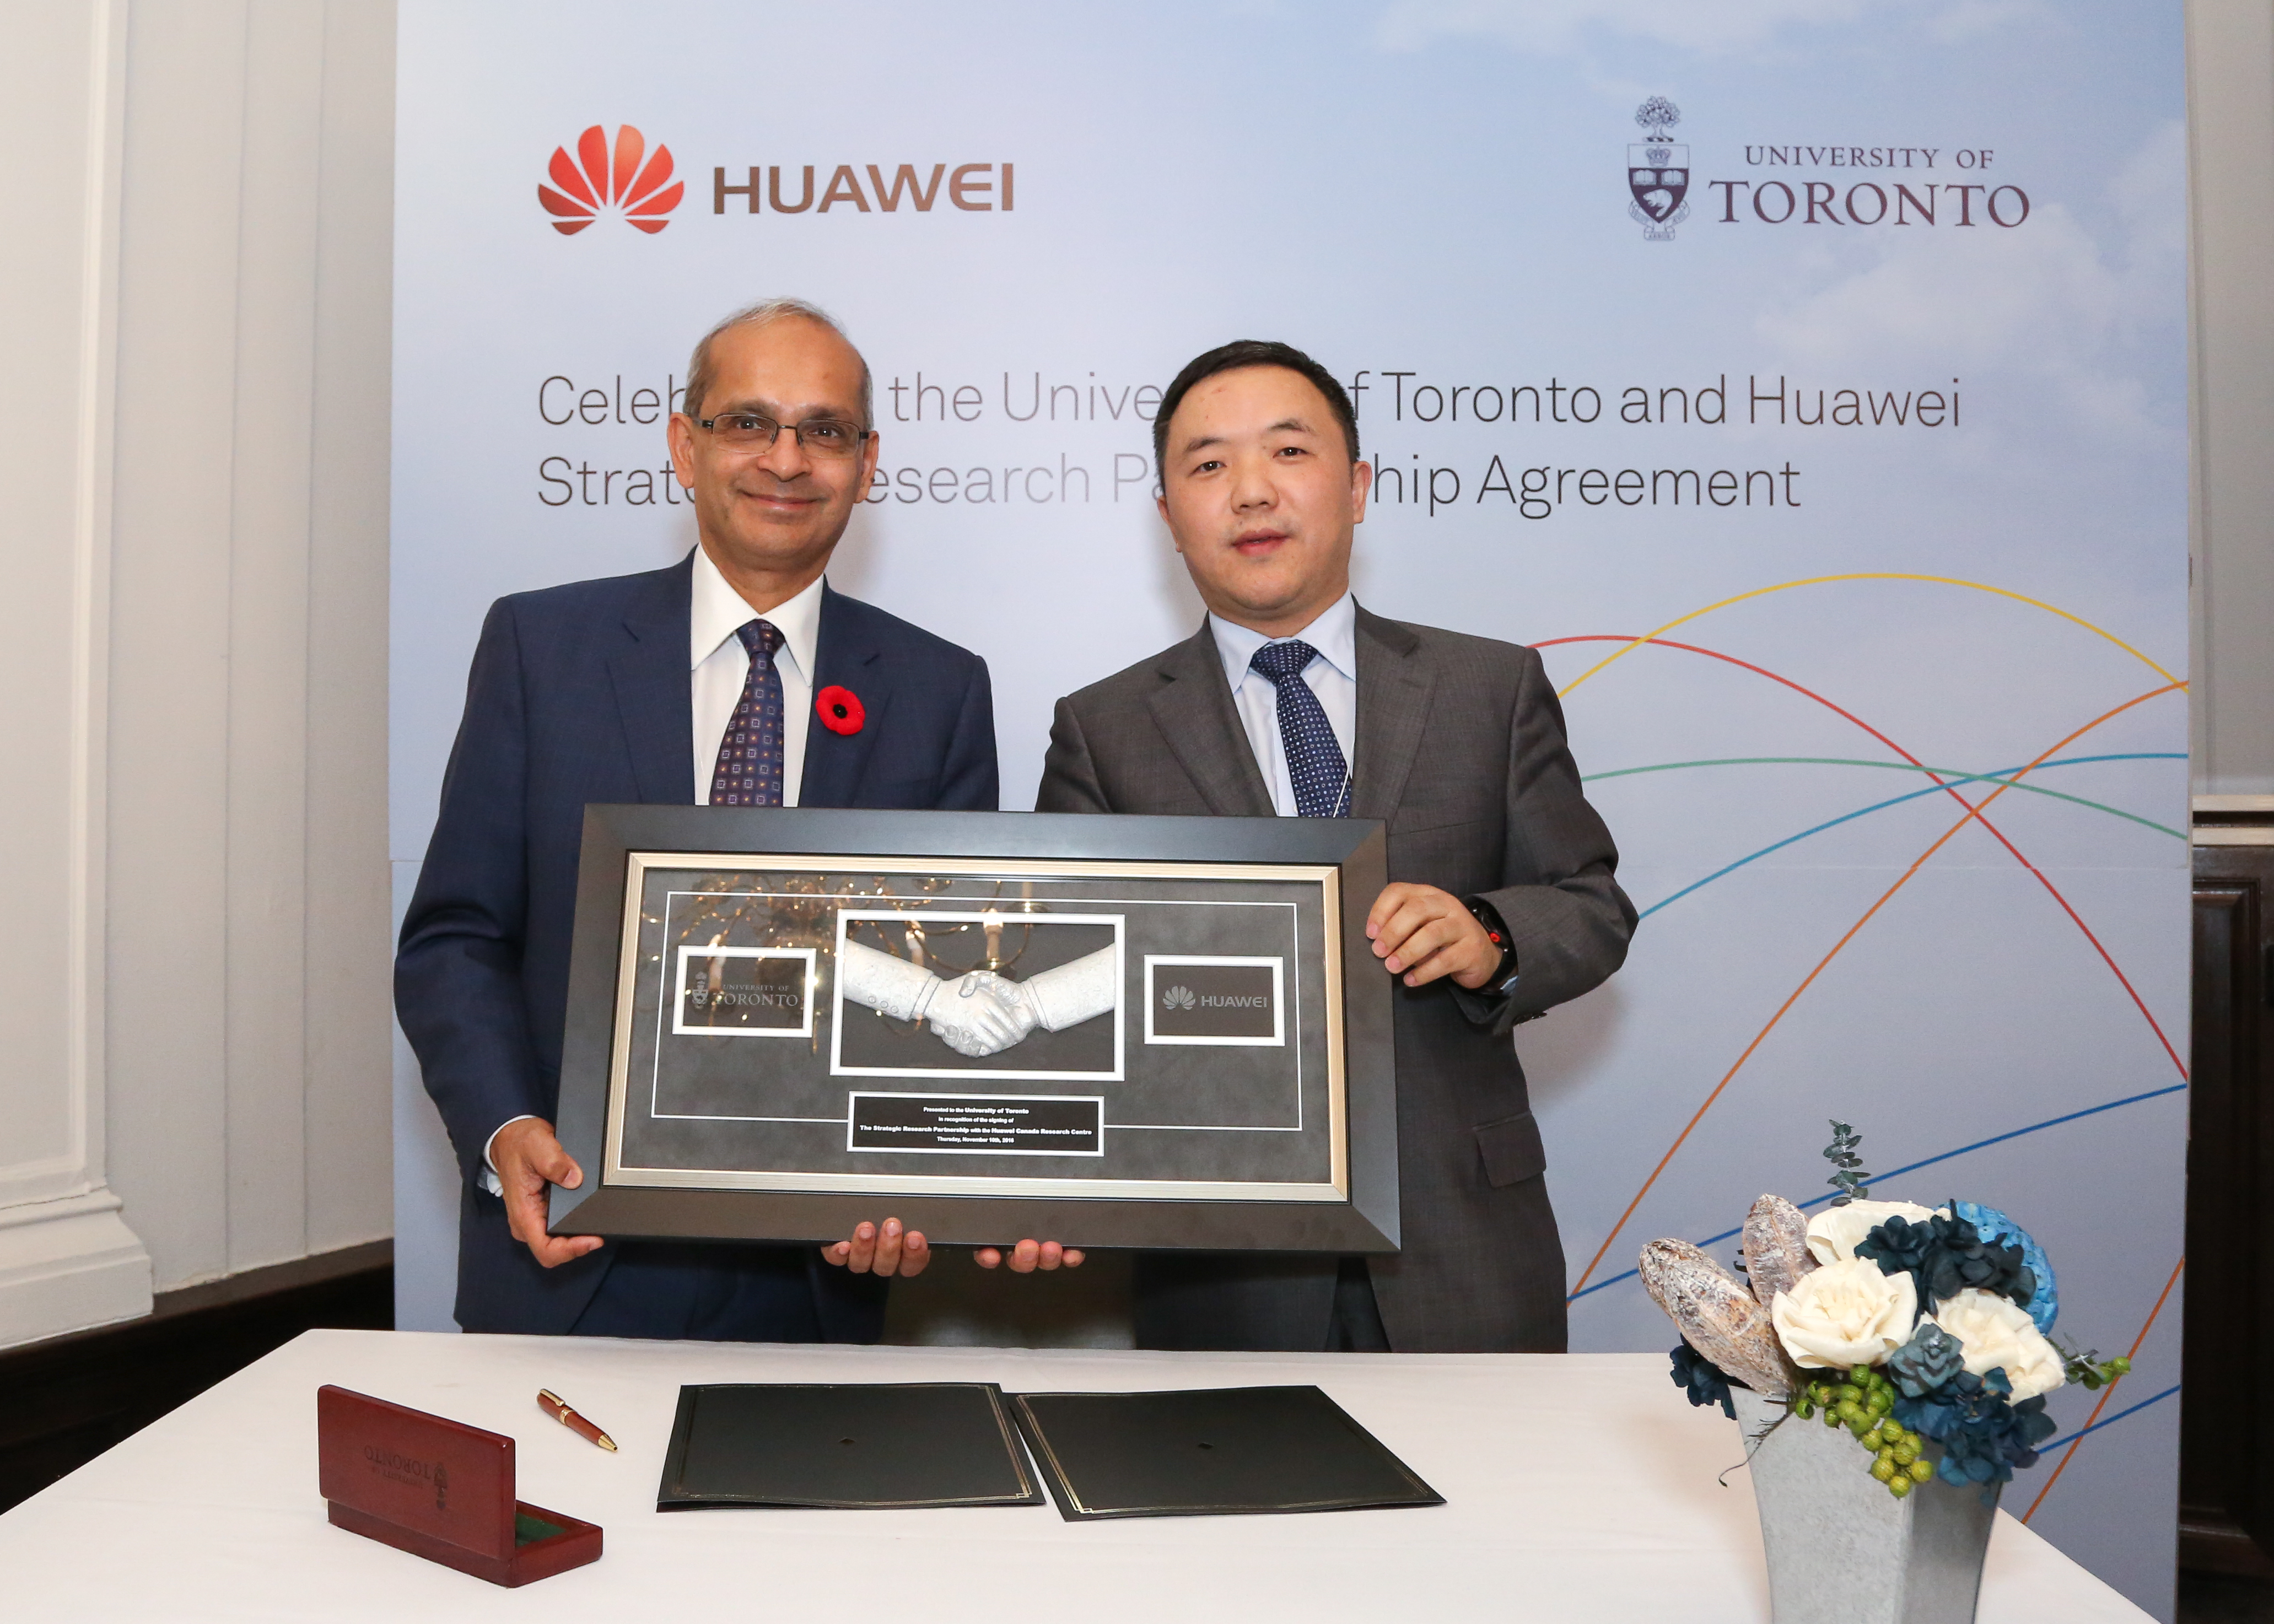 Professor Vivek Goel (left), vice president, research and innovation for the University of Toronto, and Jun Zha, president of Huawei’s Central Research Institute,